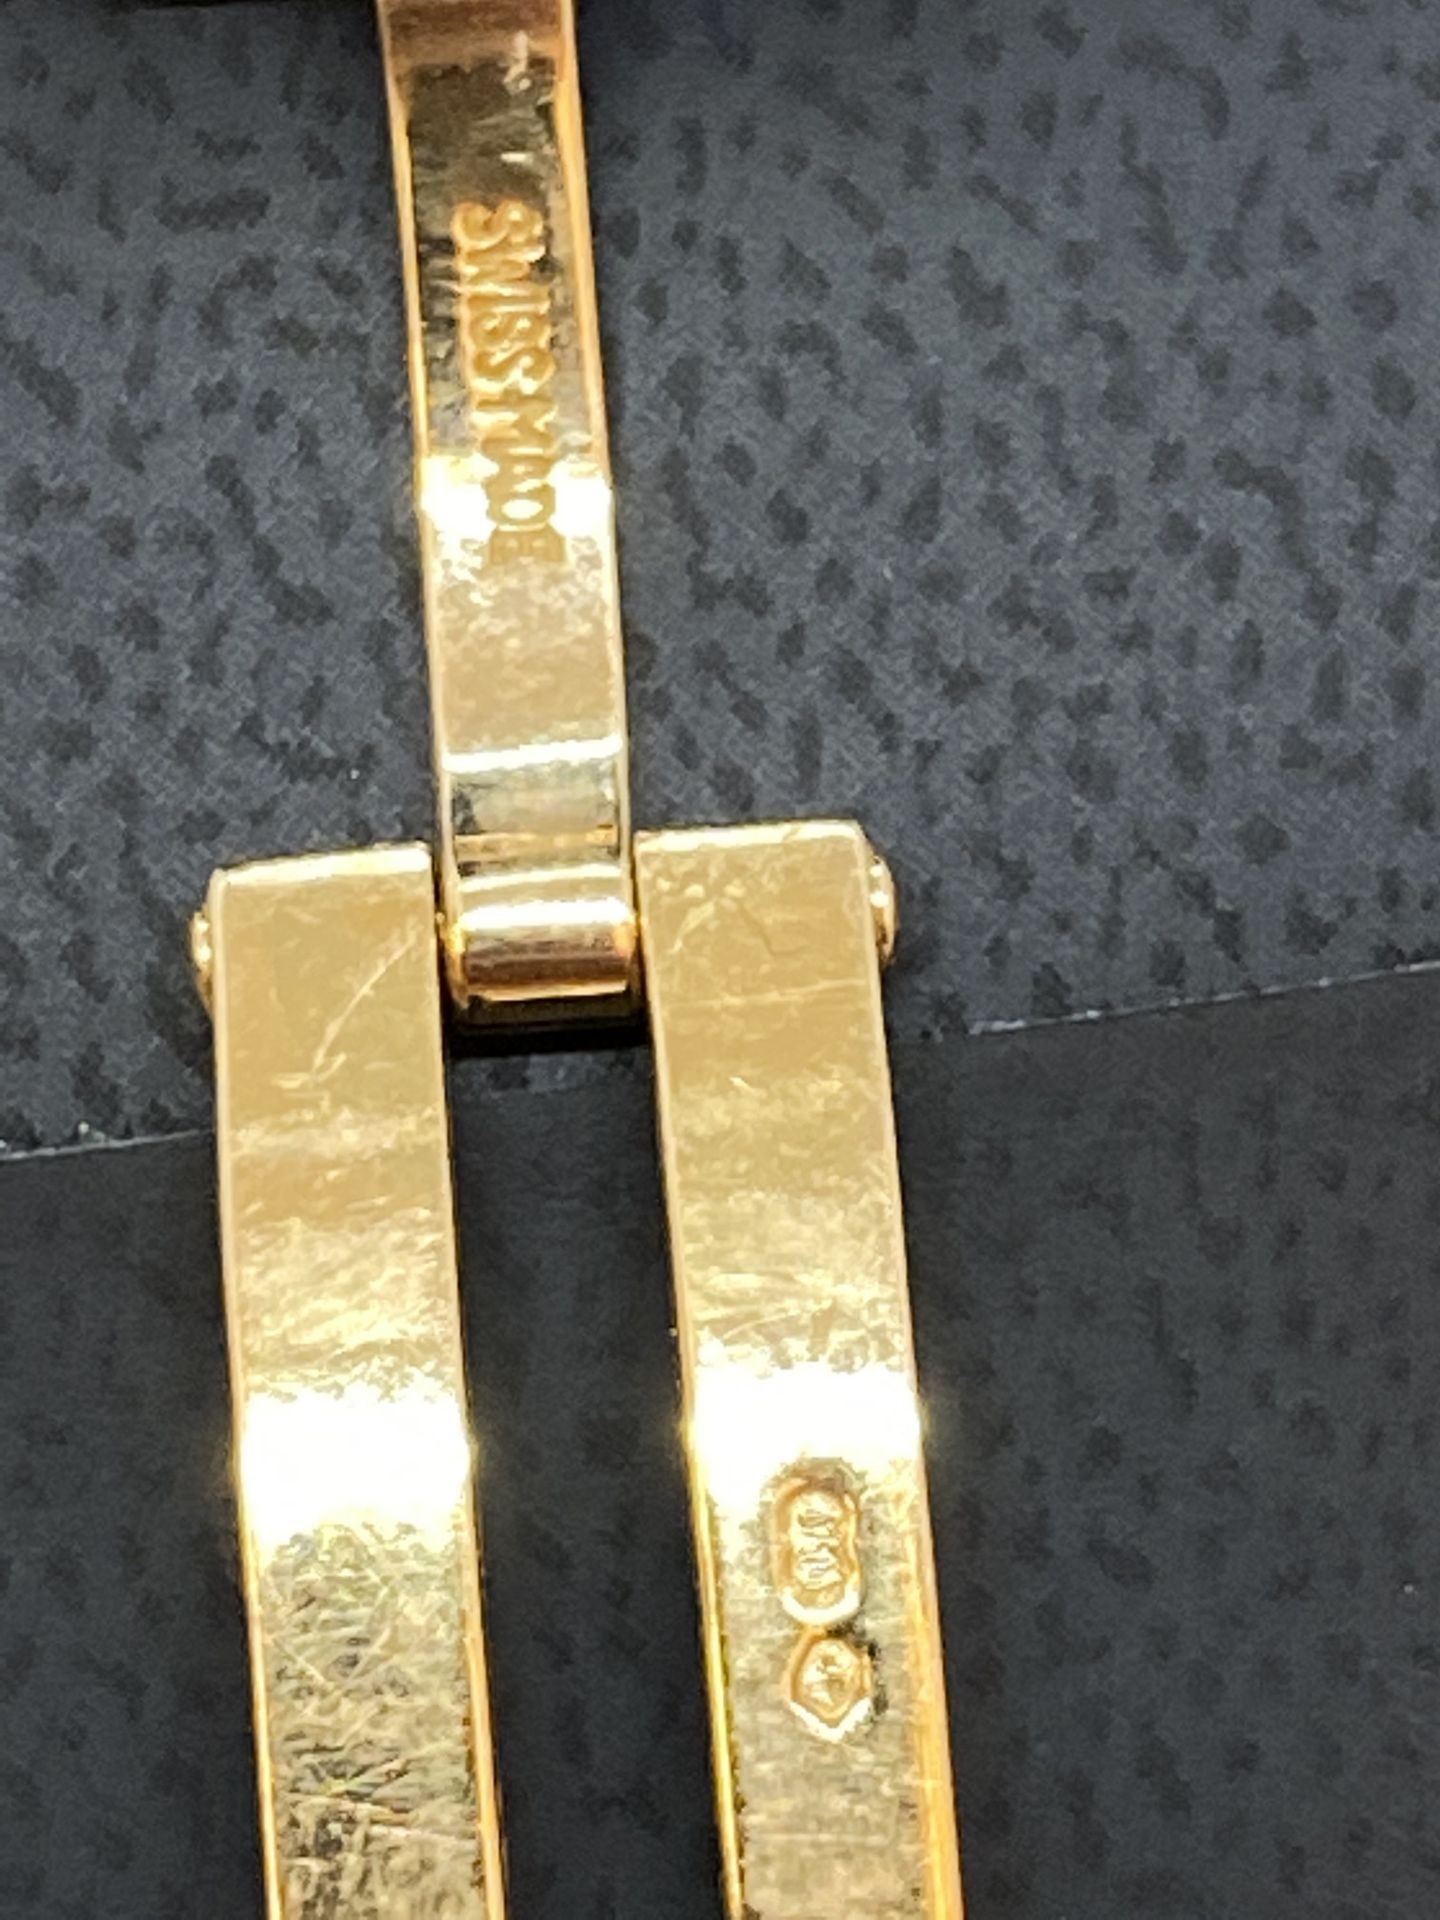 18ct GOLD CARTIER TANK FRANCAISE LADIES WATCH 2385 - Image 5 of 9